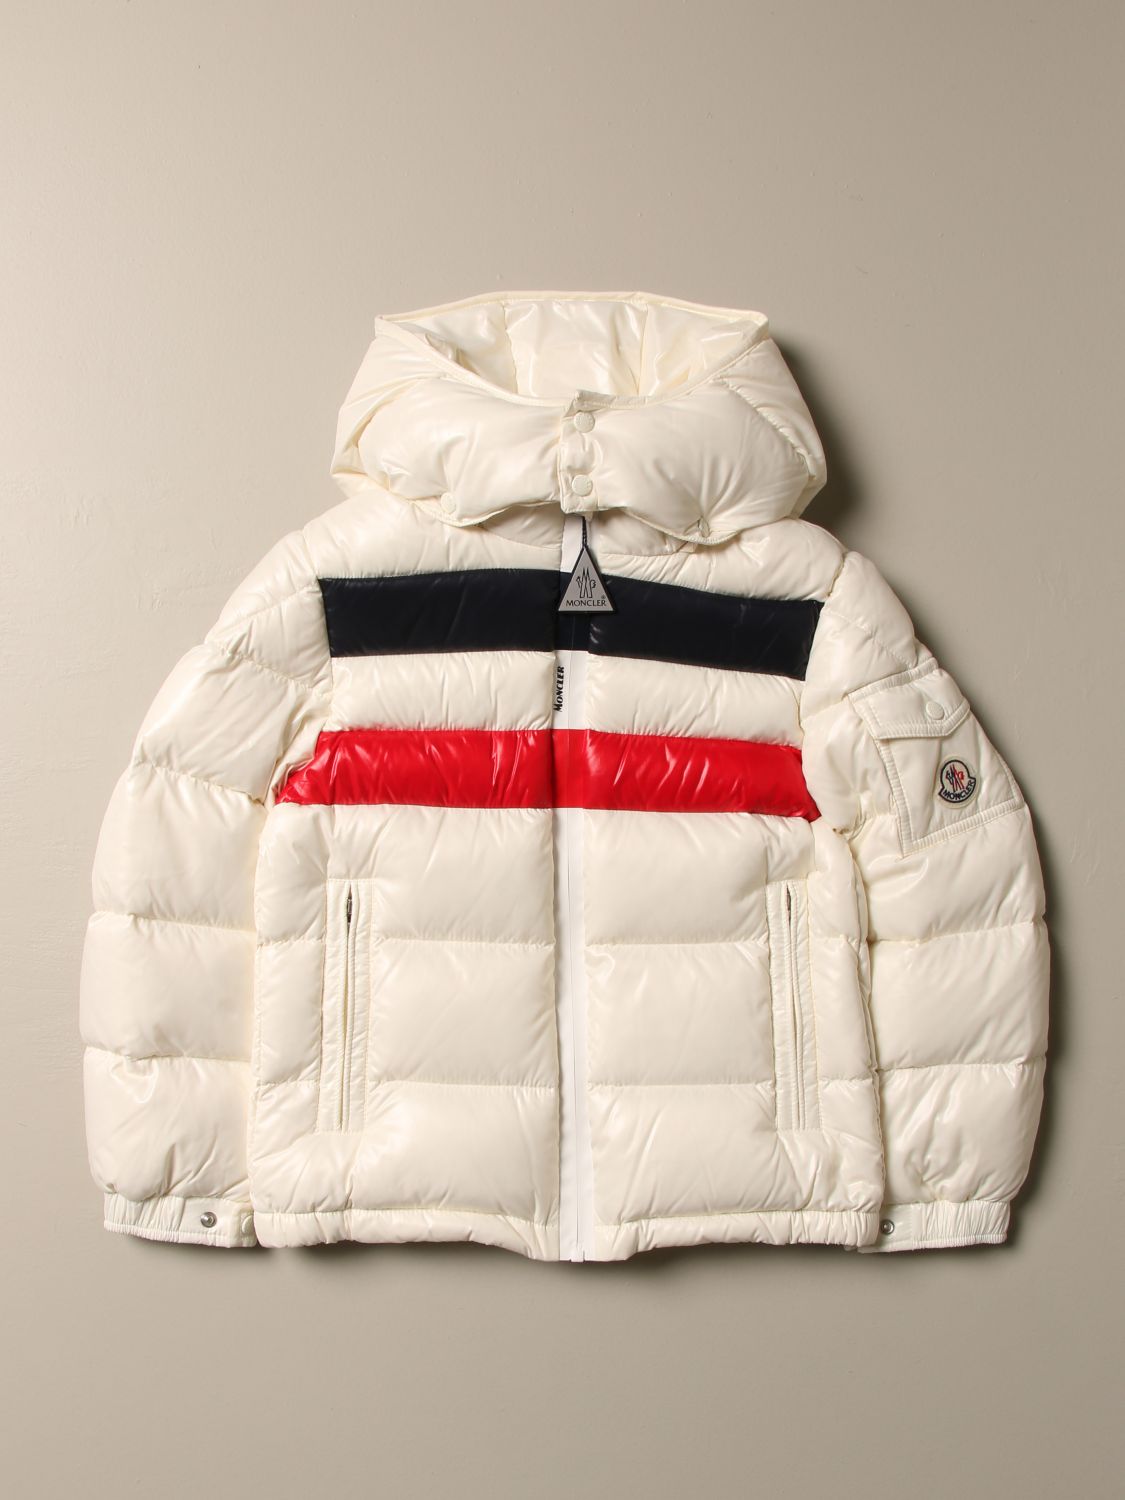 Moncler Kids Down Jacket Hotsell, 51% OFF | www.aluviondecascante.com